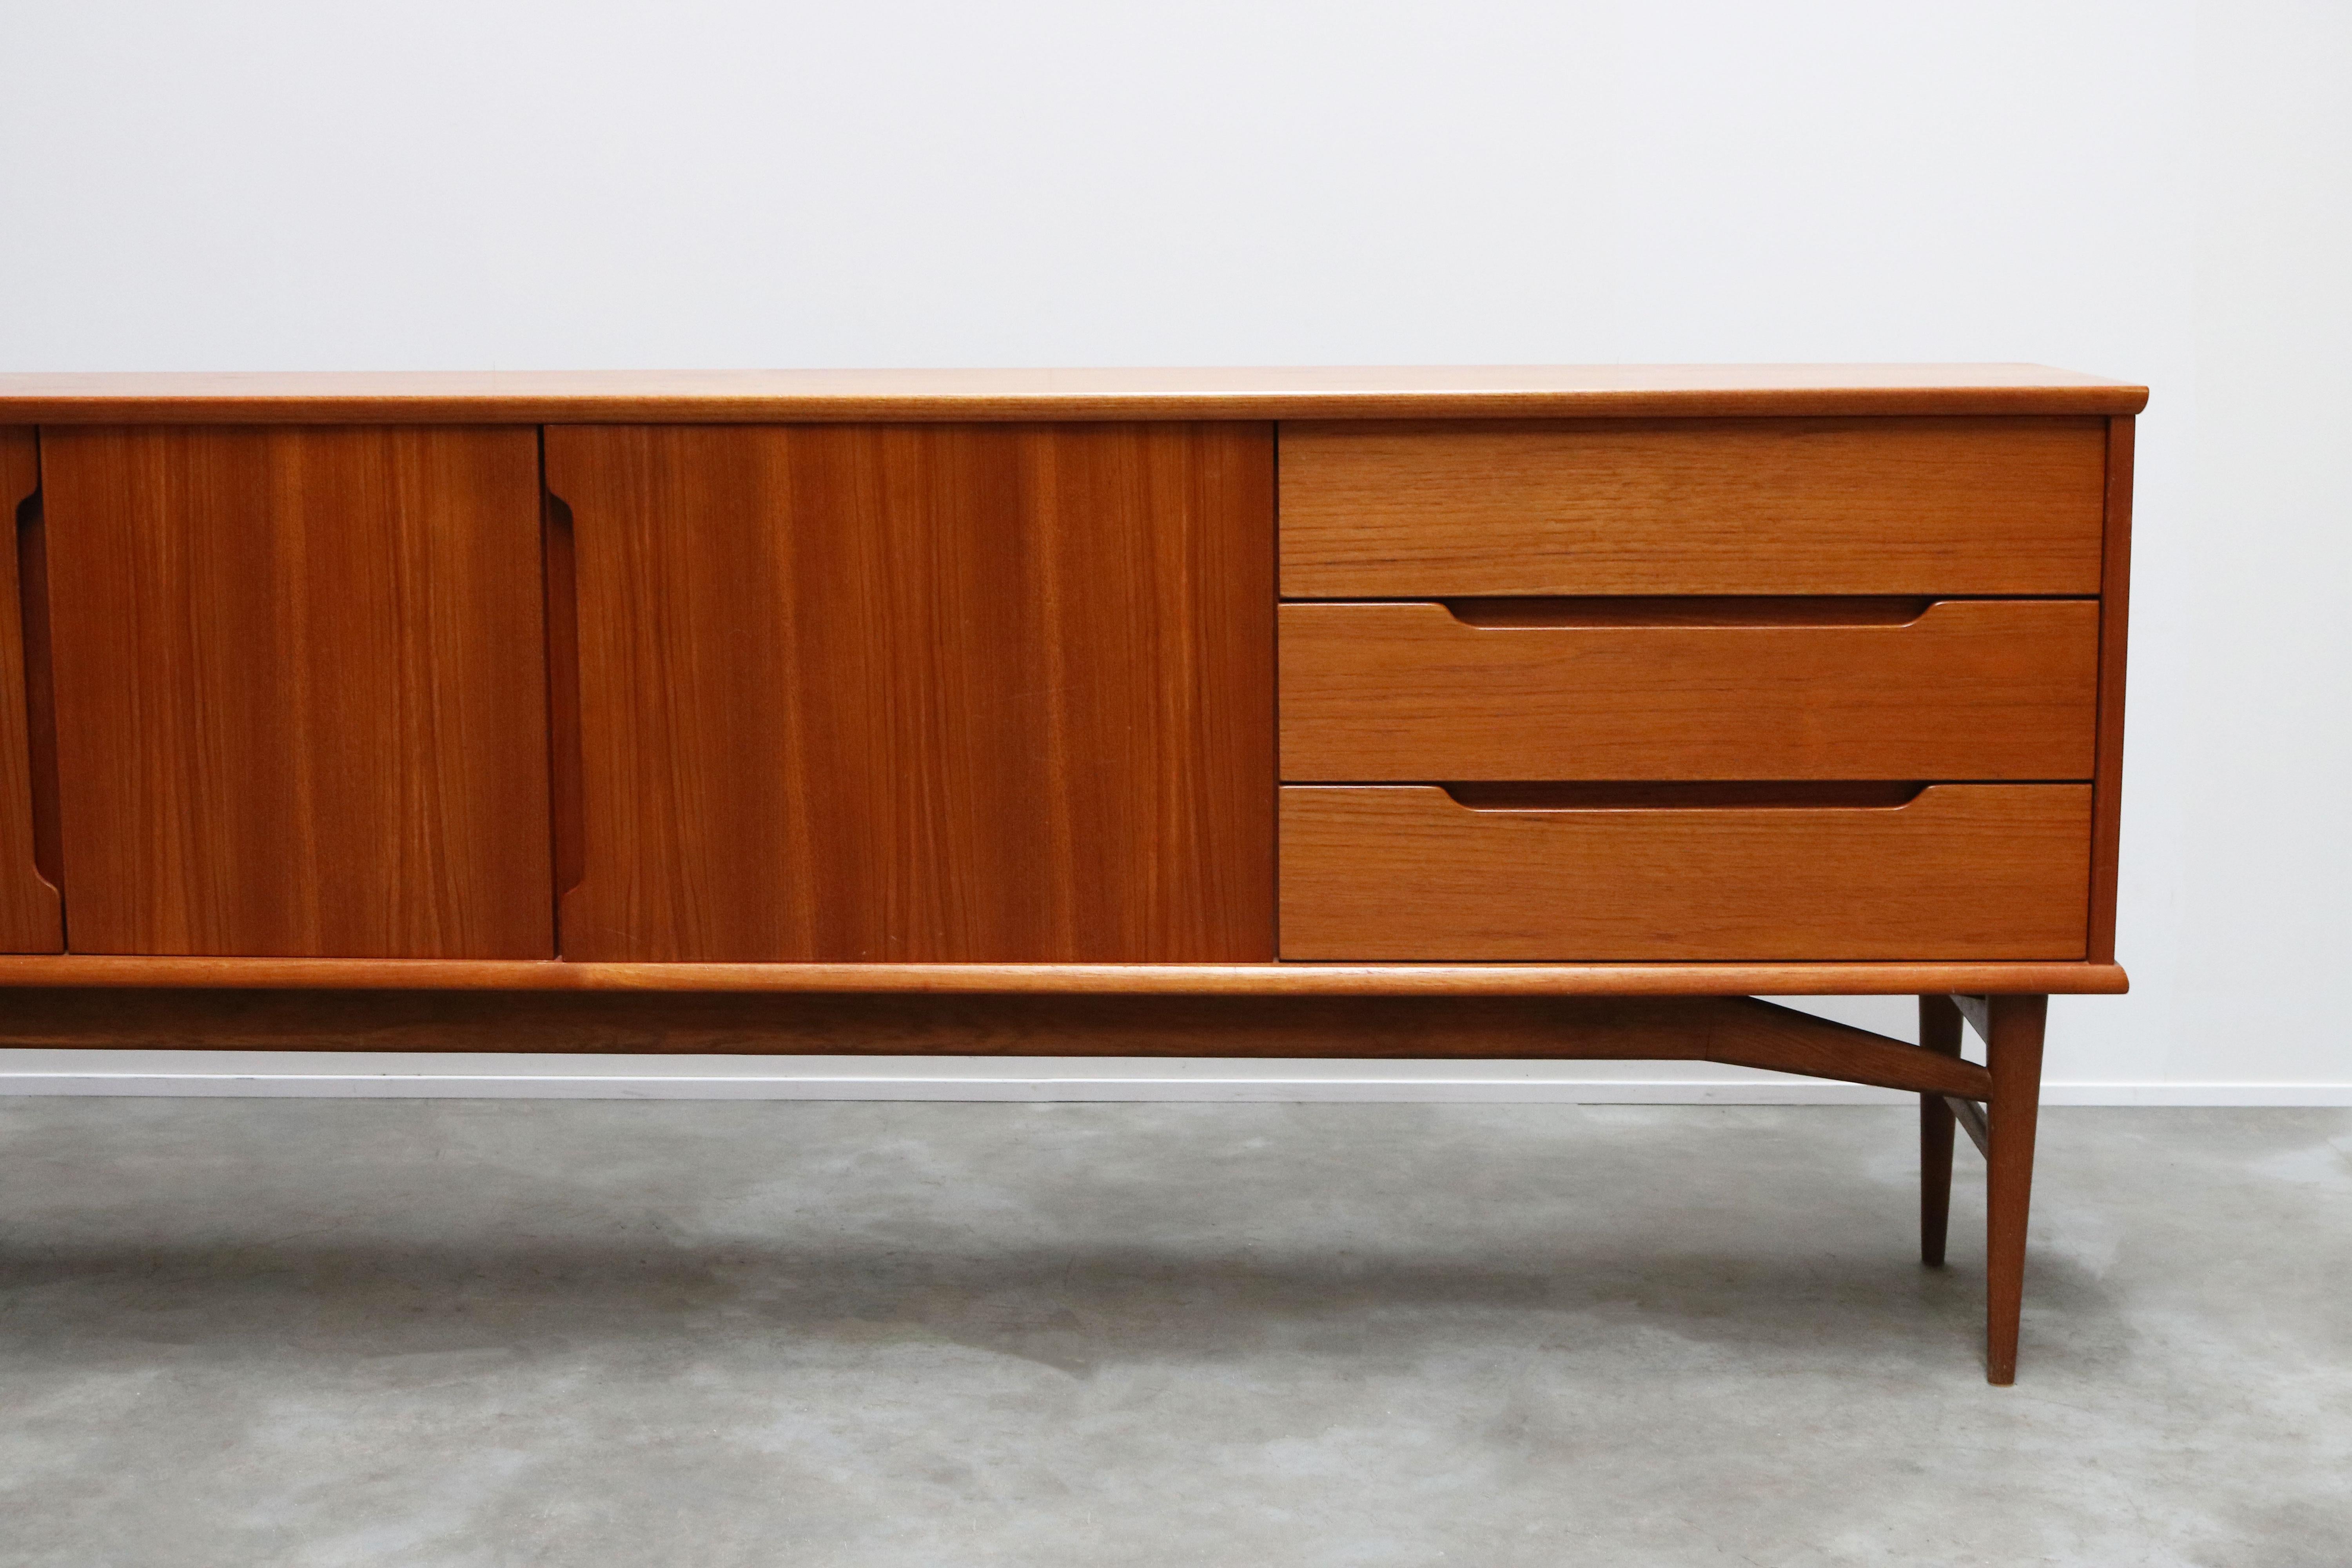 Wonderful Danish design sideboard or credenza by Borge Mogensen for Fredericia, 1950. Wonderful clean and straight design that reflects the Danish modern design movement. The sideboard has three drawers a shelf and offers plenty of storage space.